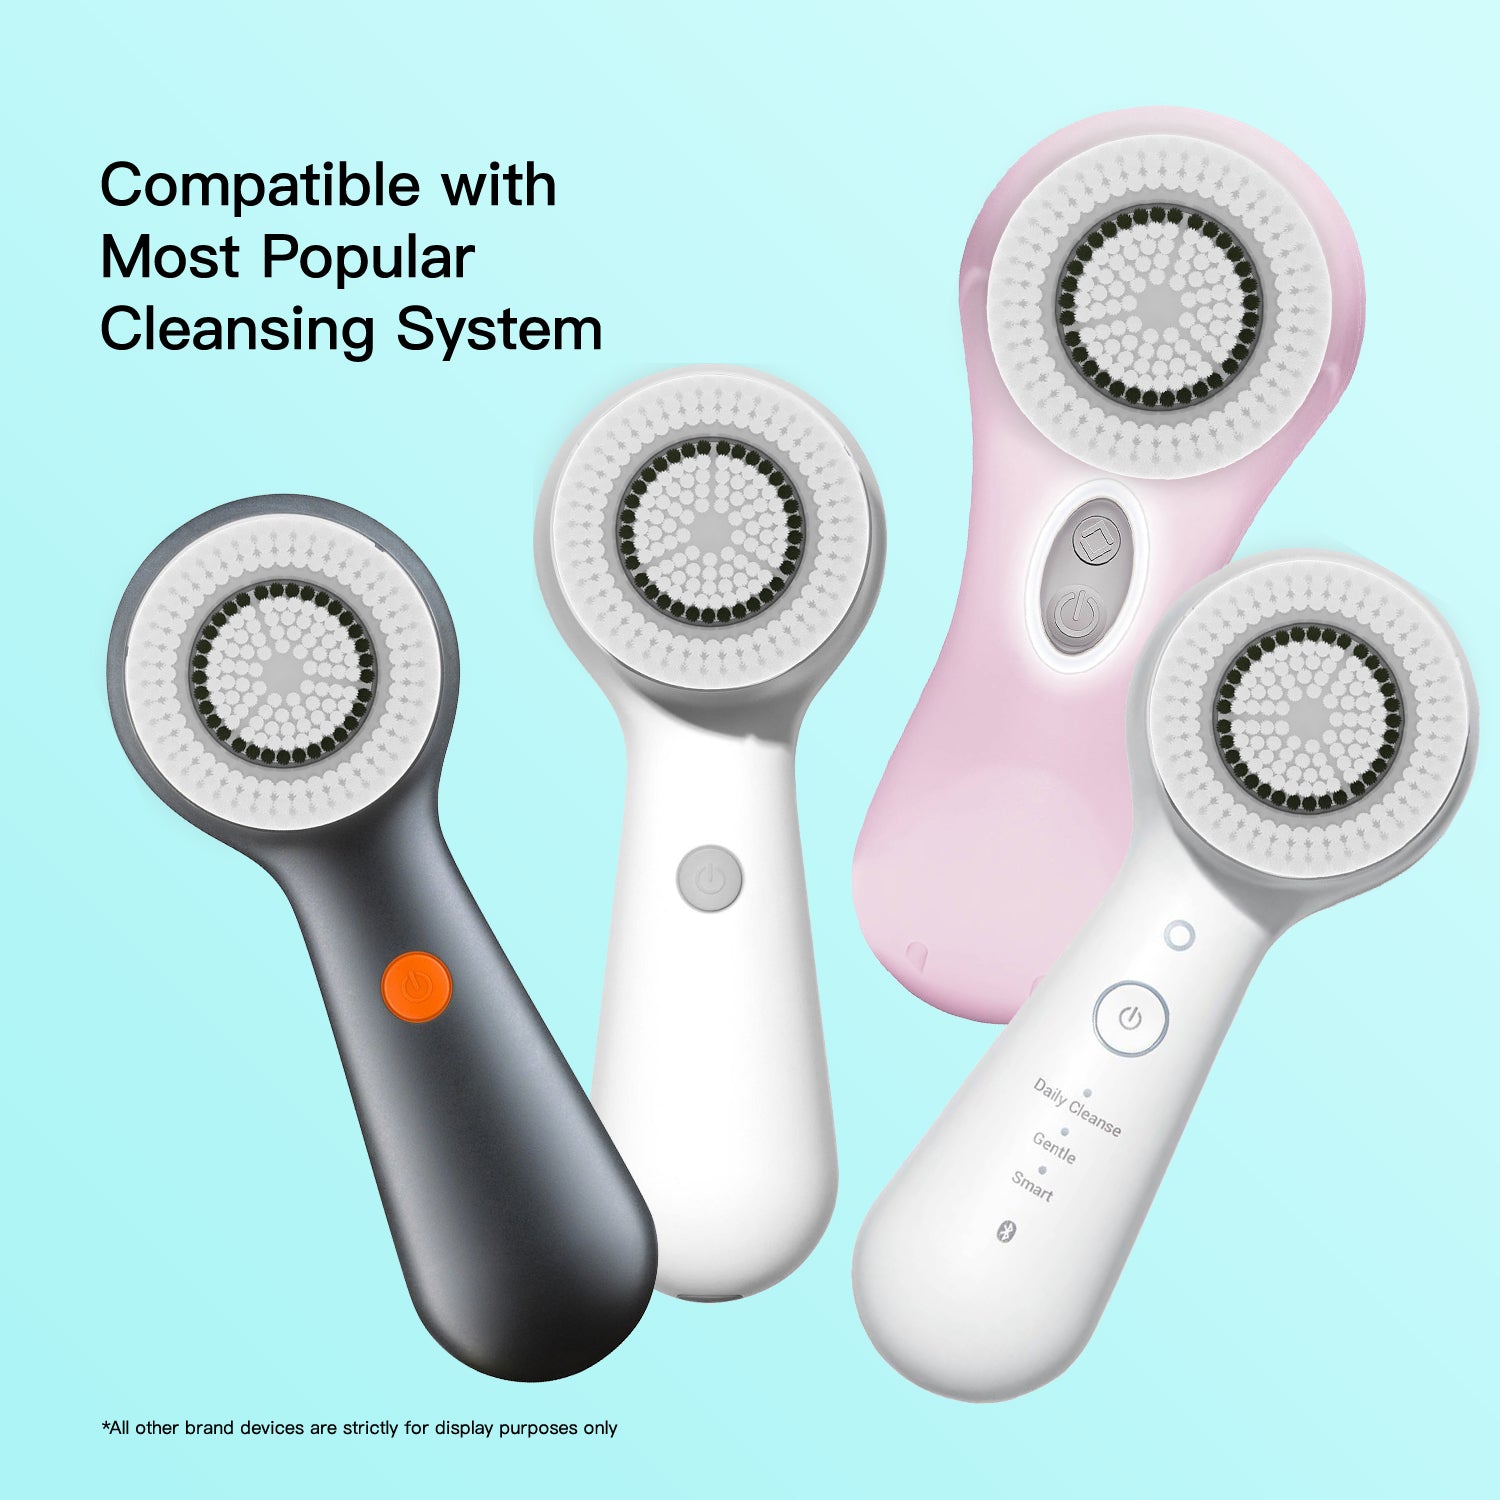 Replacement Facial Cleansing Brush Heads for Clarisonic, Sensitive, 4-pack